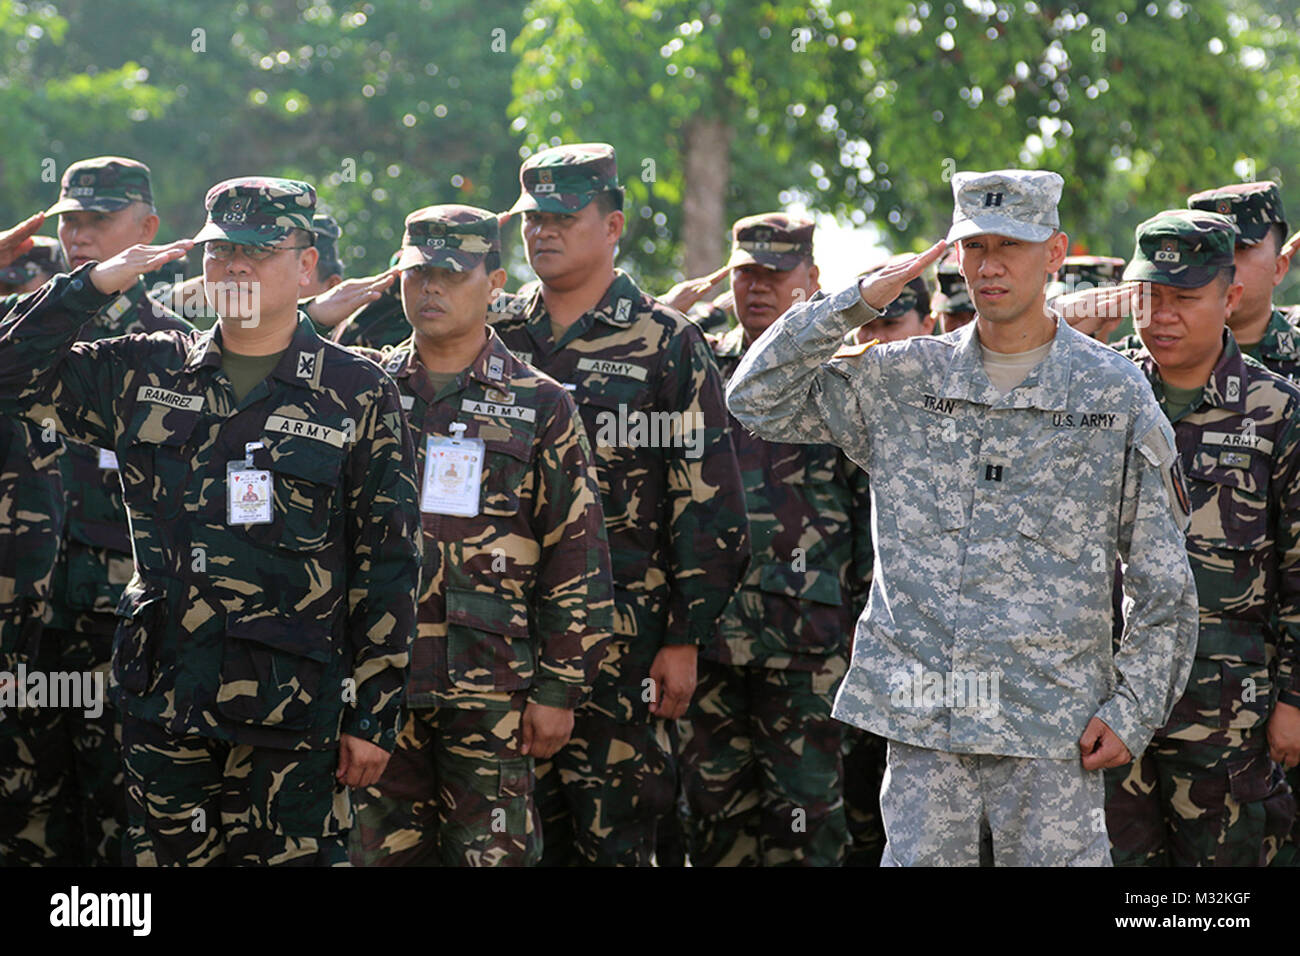 U.S. Army Reserve Cpt. Kevin K. Tran, 303rd Maneuver Enhancement Brigade, operations officer in charge in support of Balikatan 2016 Combined Joint Civil Military Operations Task Force, participates in Armed Forces of the Philippines (AFP) flag raising ceremony at Camp Peralta, Capiz, Philippines, in memory of the historical Bataan Death March of 1942, April 09, 2016. The ceremony was one of many that have brought AFP and U.S. military service members together during the Balikatan Exercise 2016. Balikatan, meaning 'shoulder to shoulder,' is an annual bilateral training exercise that allows for  Stock Photo